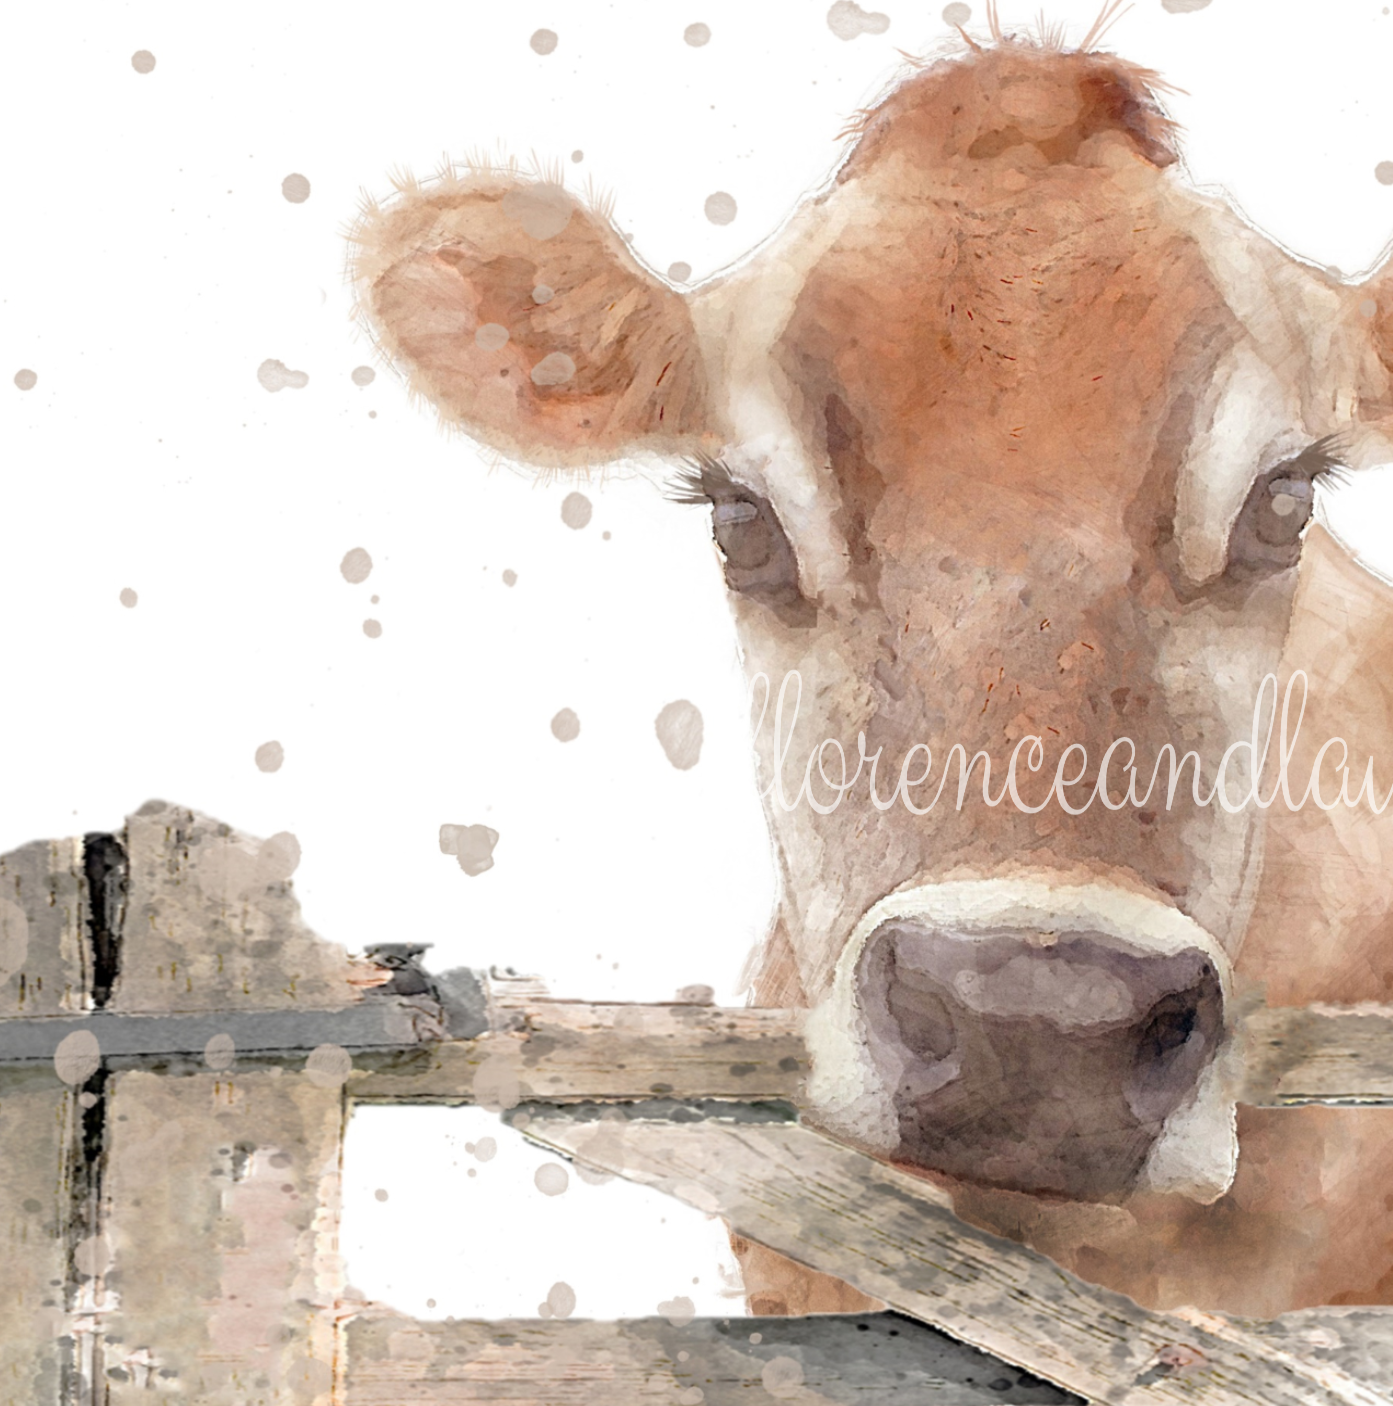 Personalised Jersey Cow Print - Florence & Lavender